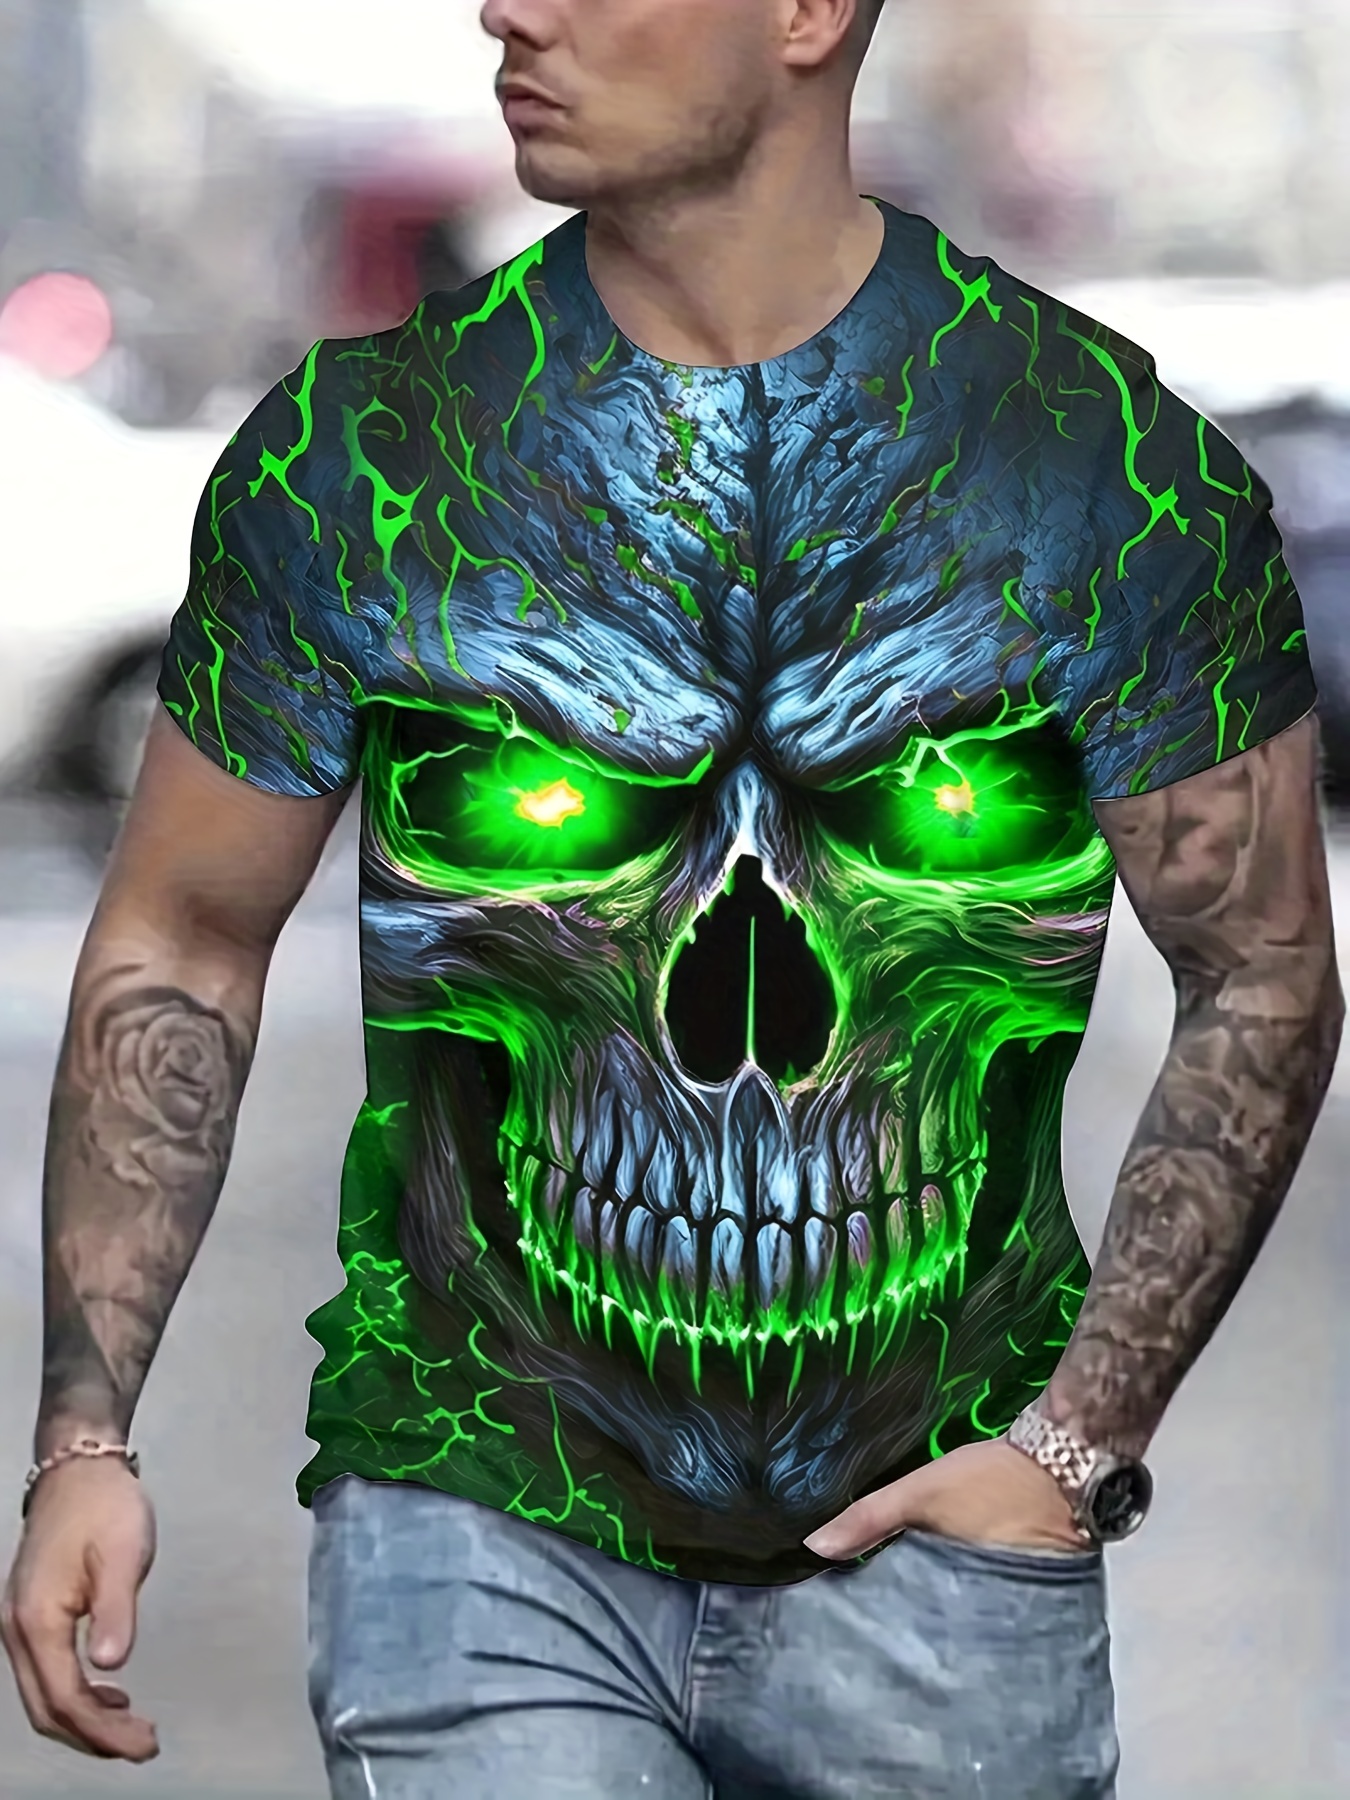 Men's Skull 3D Printed T-shirt, Funny Cool Graphic Crew Neck Casual Tee Top, Stylish Streetwear, Plus Size Men Clothing